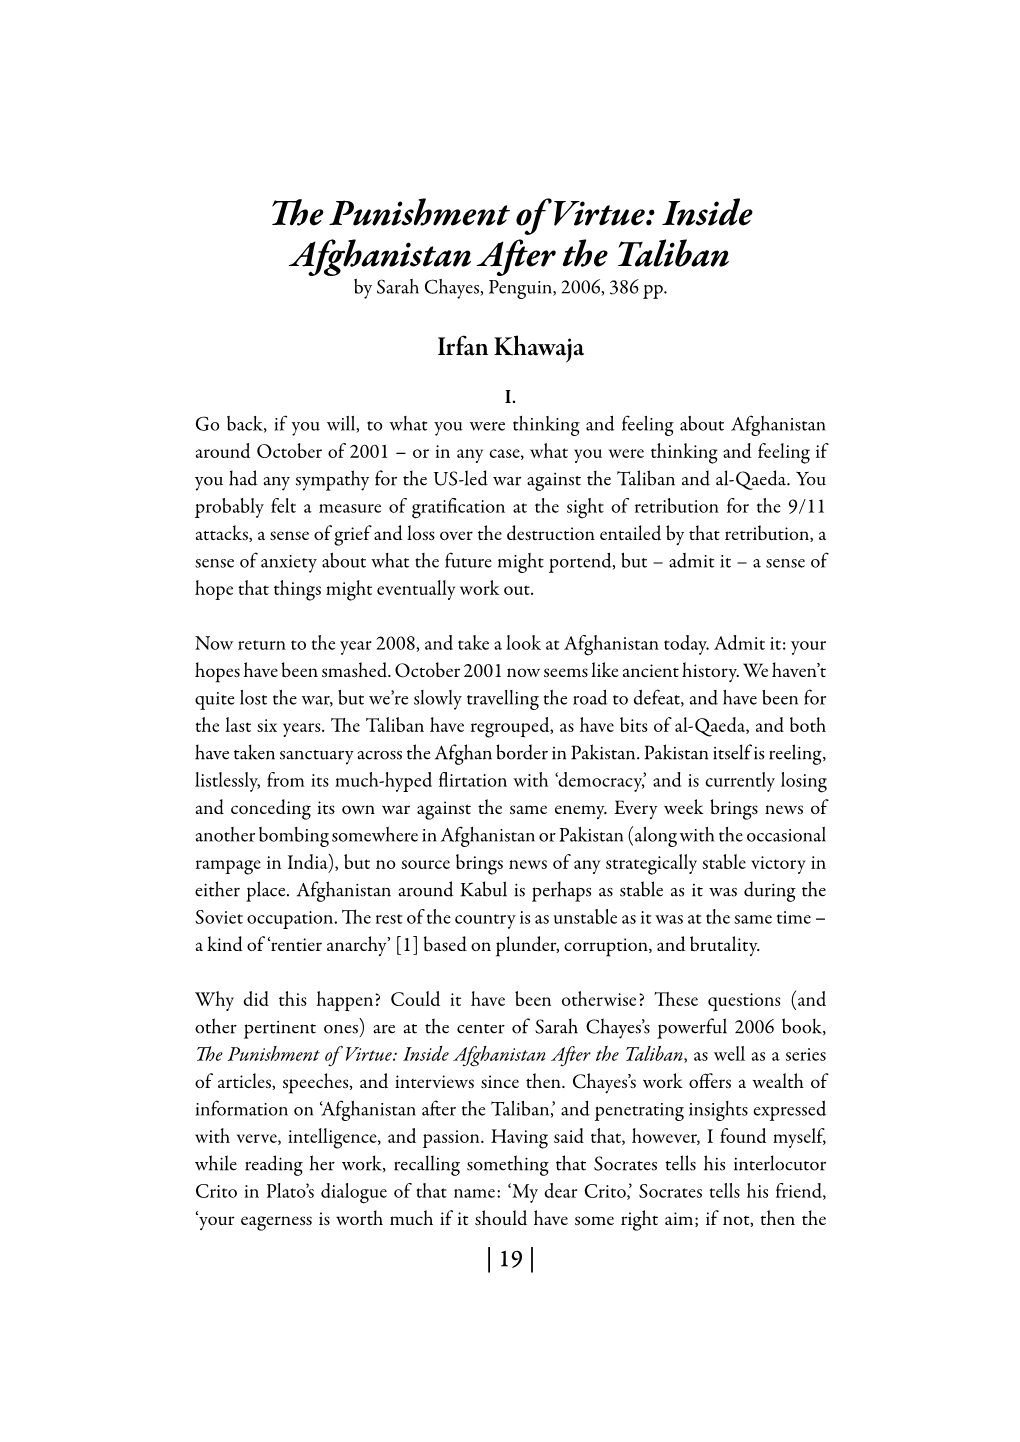 The Punishment of Virtue: Inside Afghanistan After the Taliban by Sarah Chayes, Penguin, 2006, 386 Pp